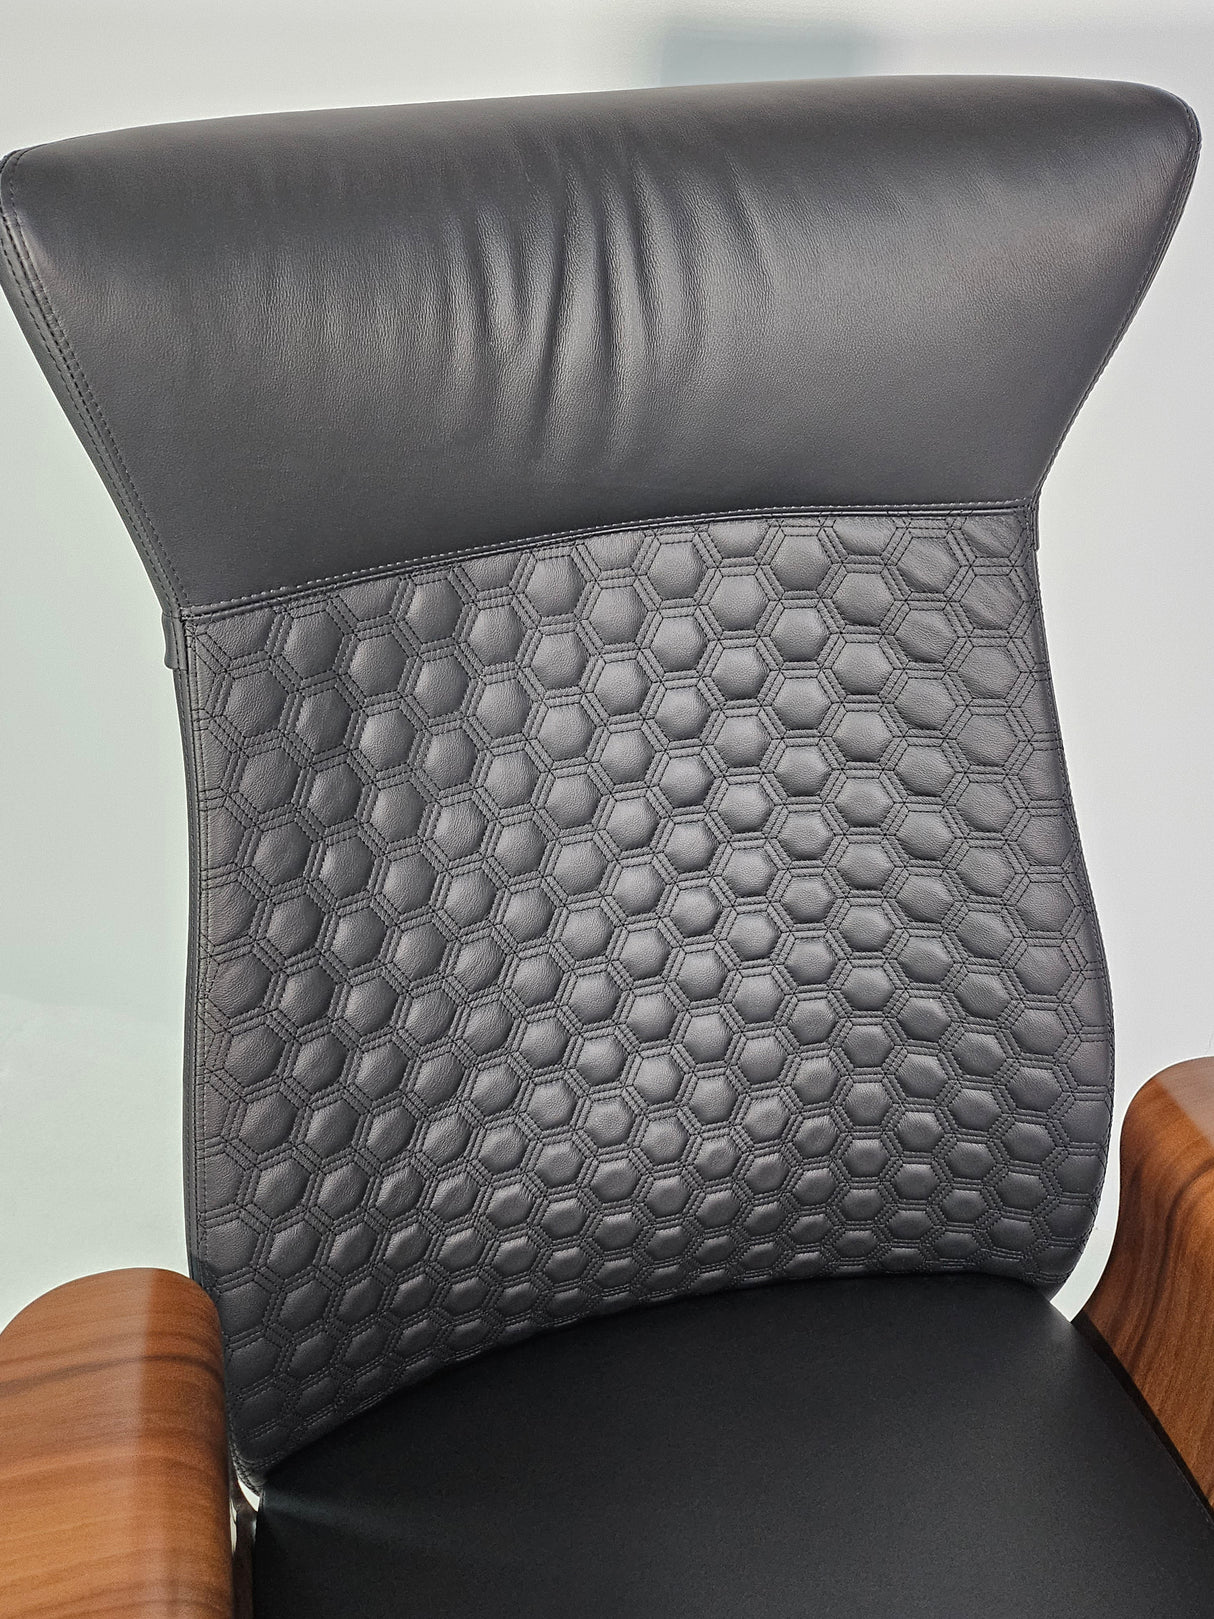 Modern Genuine Black Leather High Back Office Chair with Hexagonal Design - 6084HL